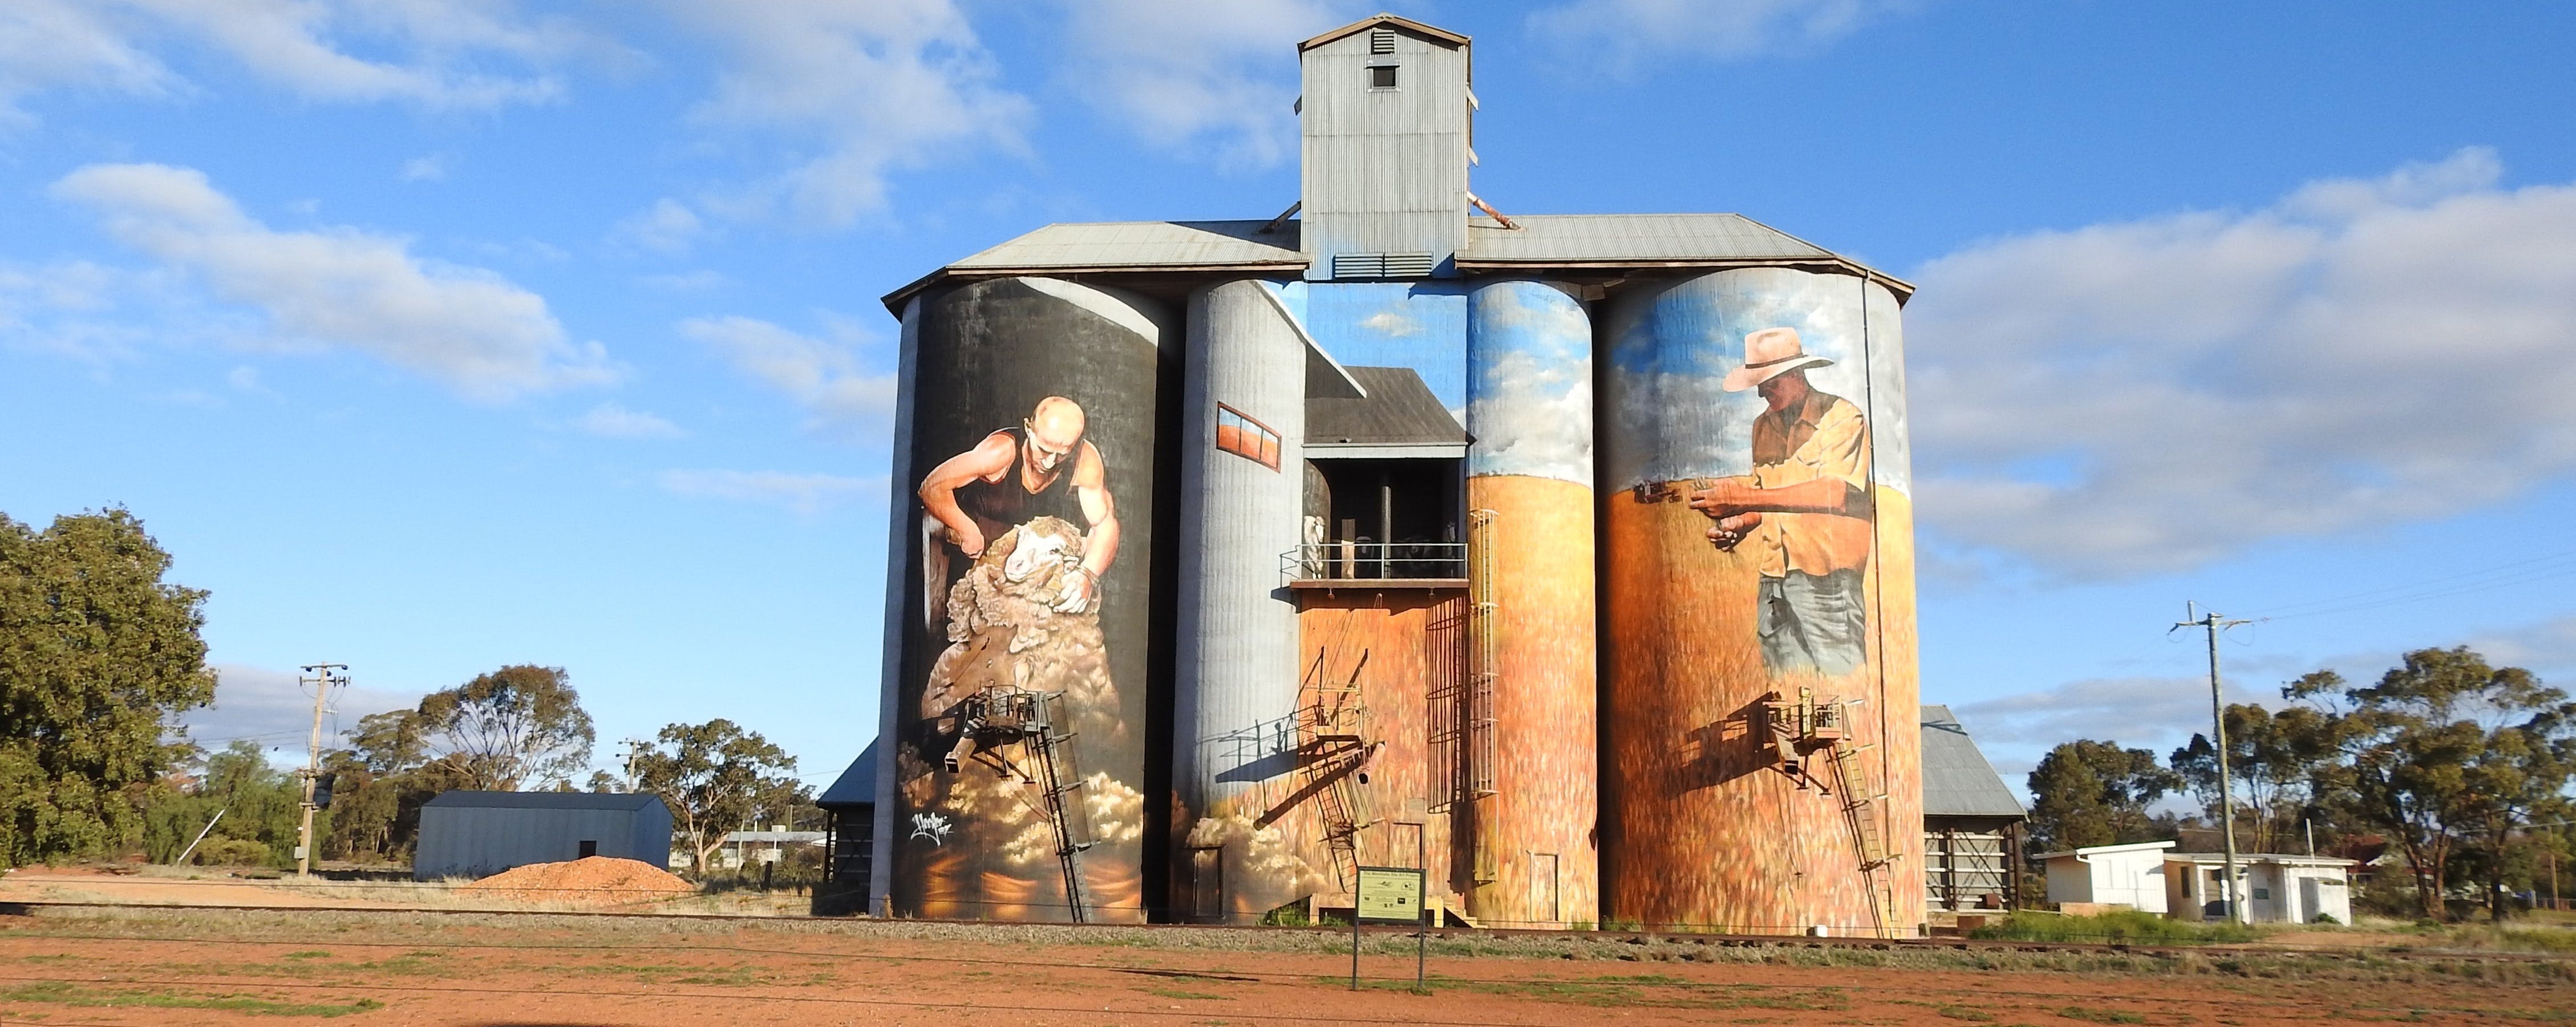 Riverina Outdoor Art Trail - Foster Accommodation